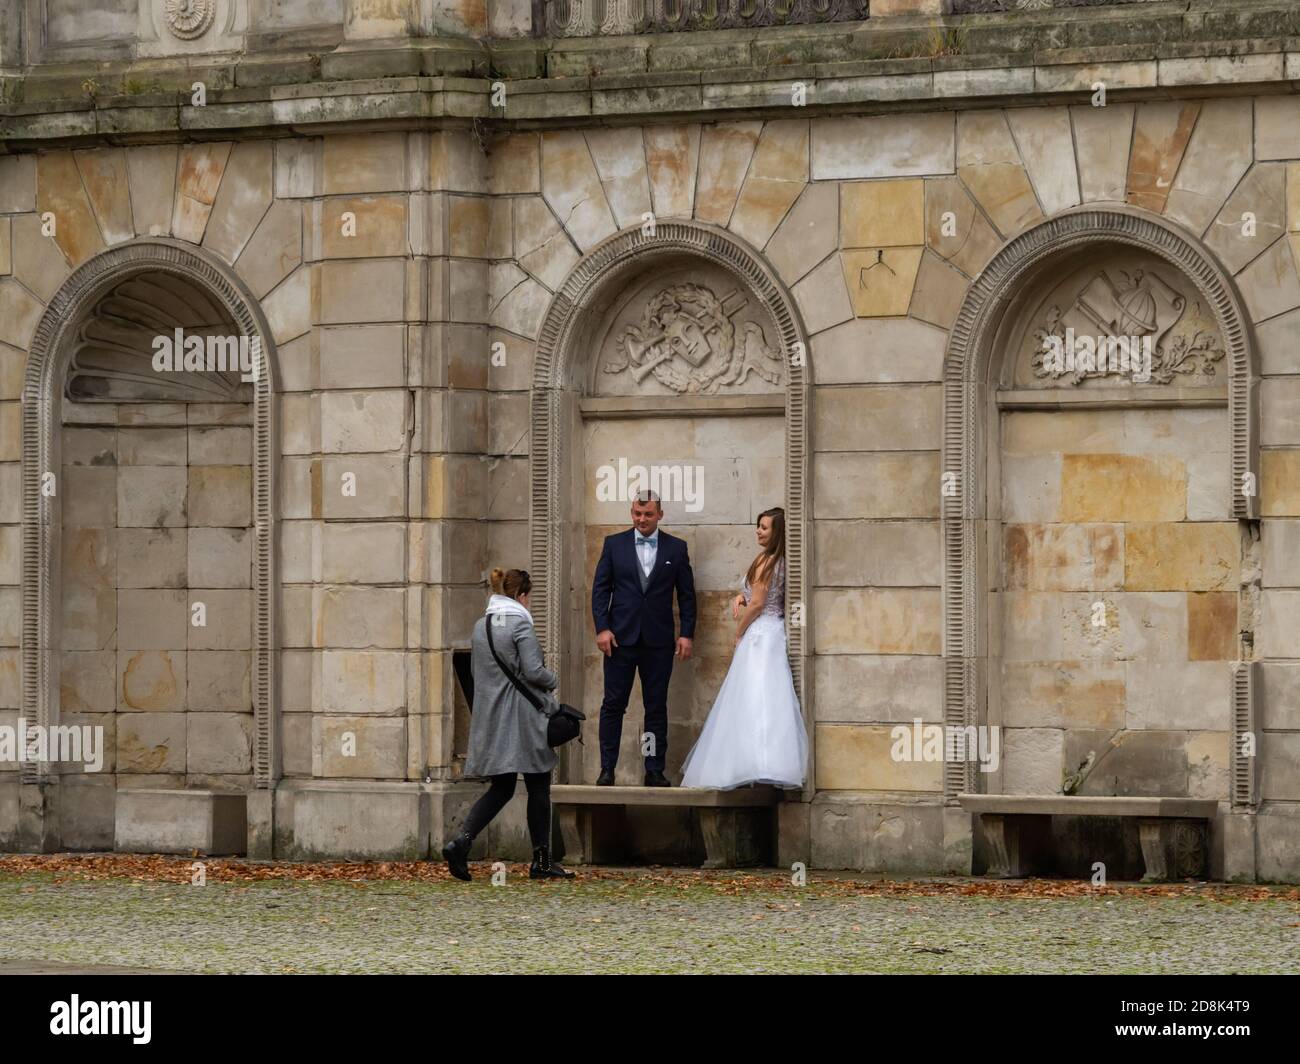 Warsaw, Poland - 29/10/2020 - photoshoot of young couples, just married in public park. Stock Photo